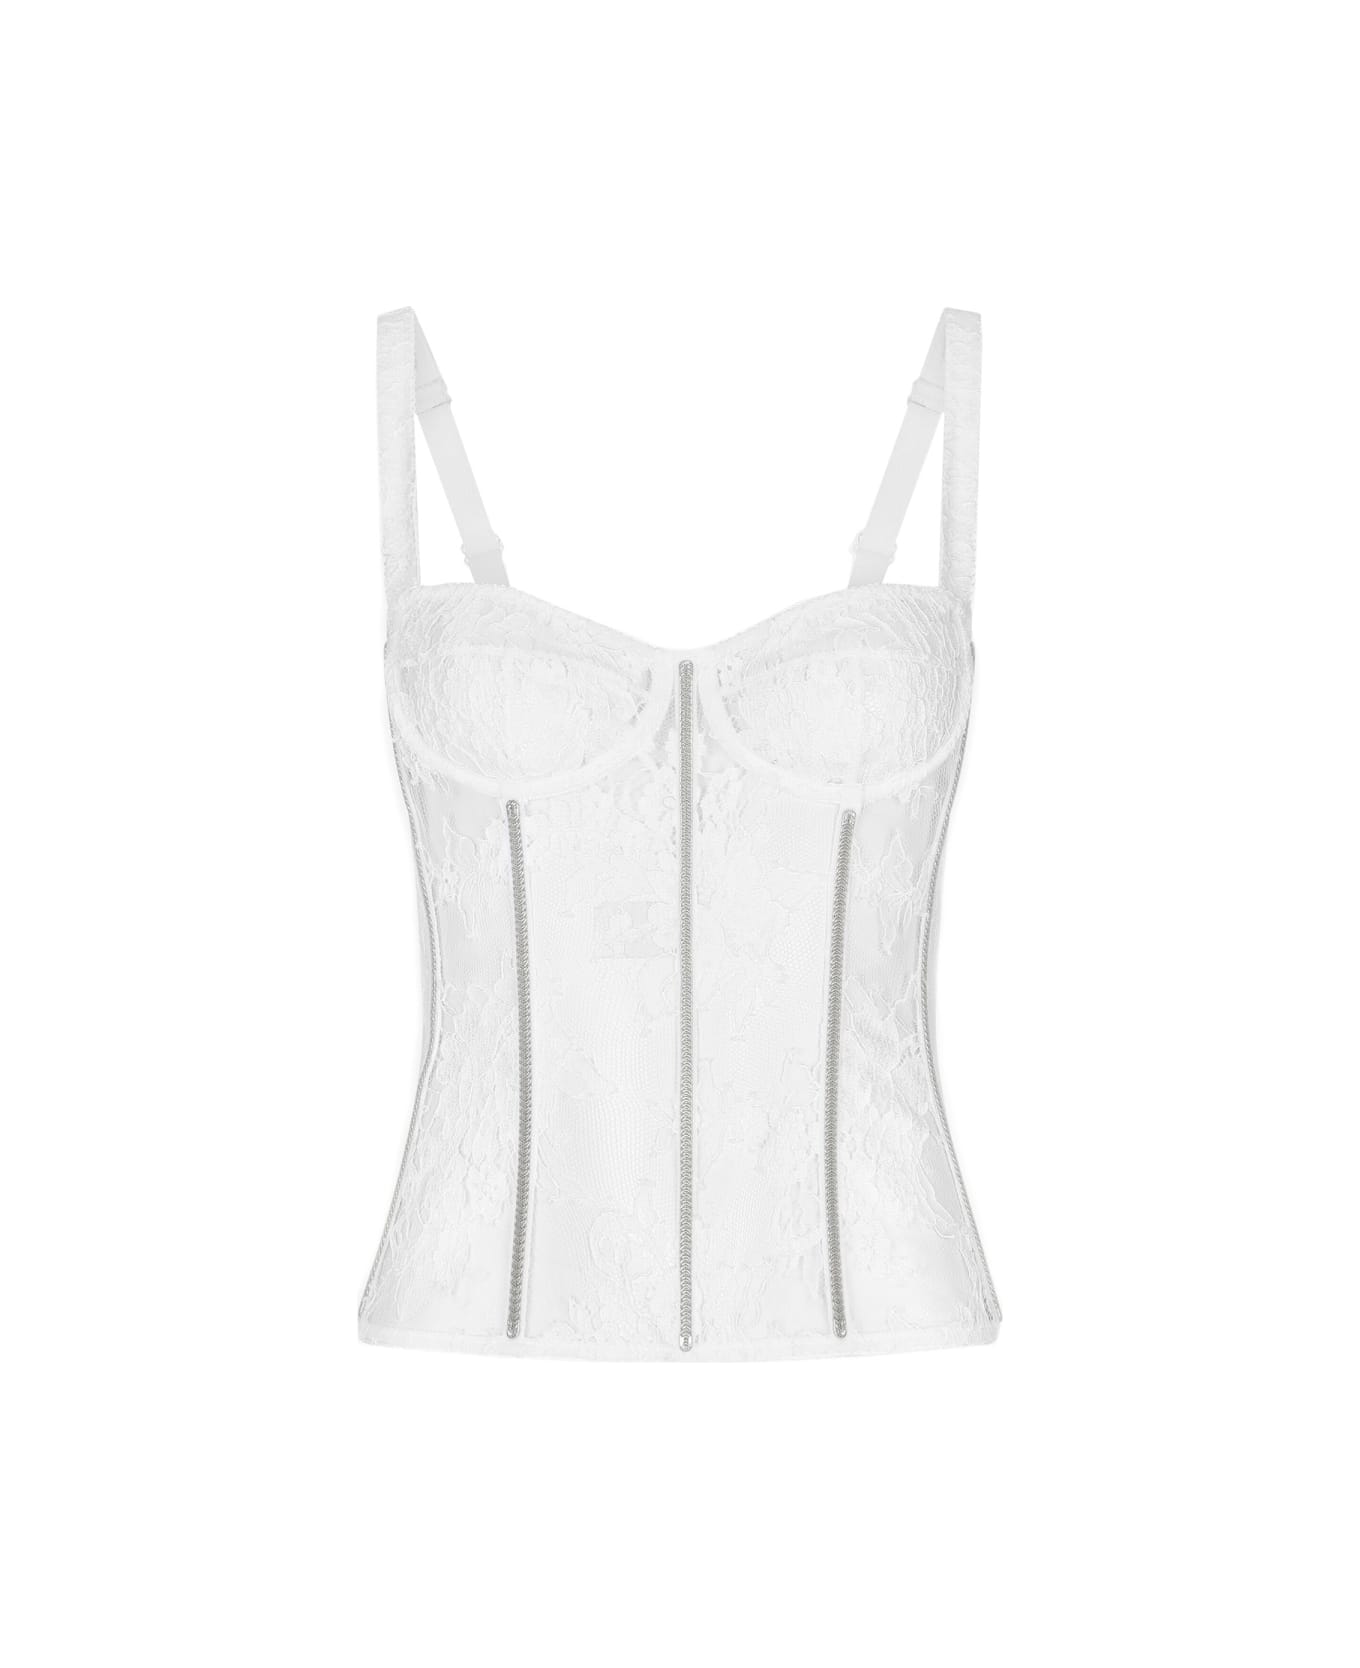 Dolce & Gabbana Lace Lingerie Bustier - WHITE ランジェリー＆パジャマ